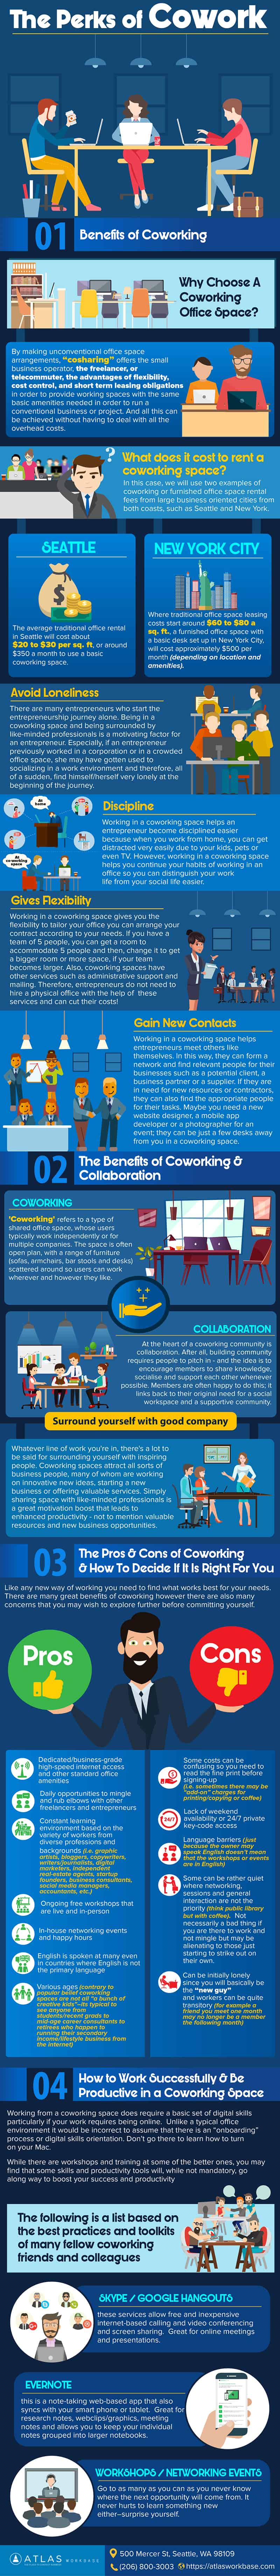 The Perks of Cowork infographic